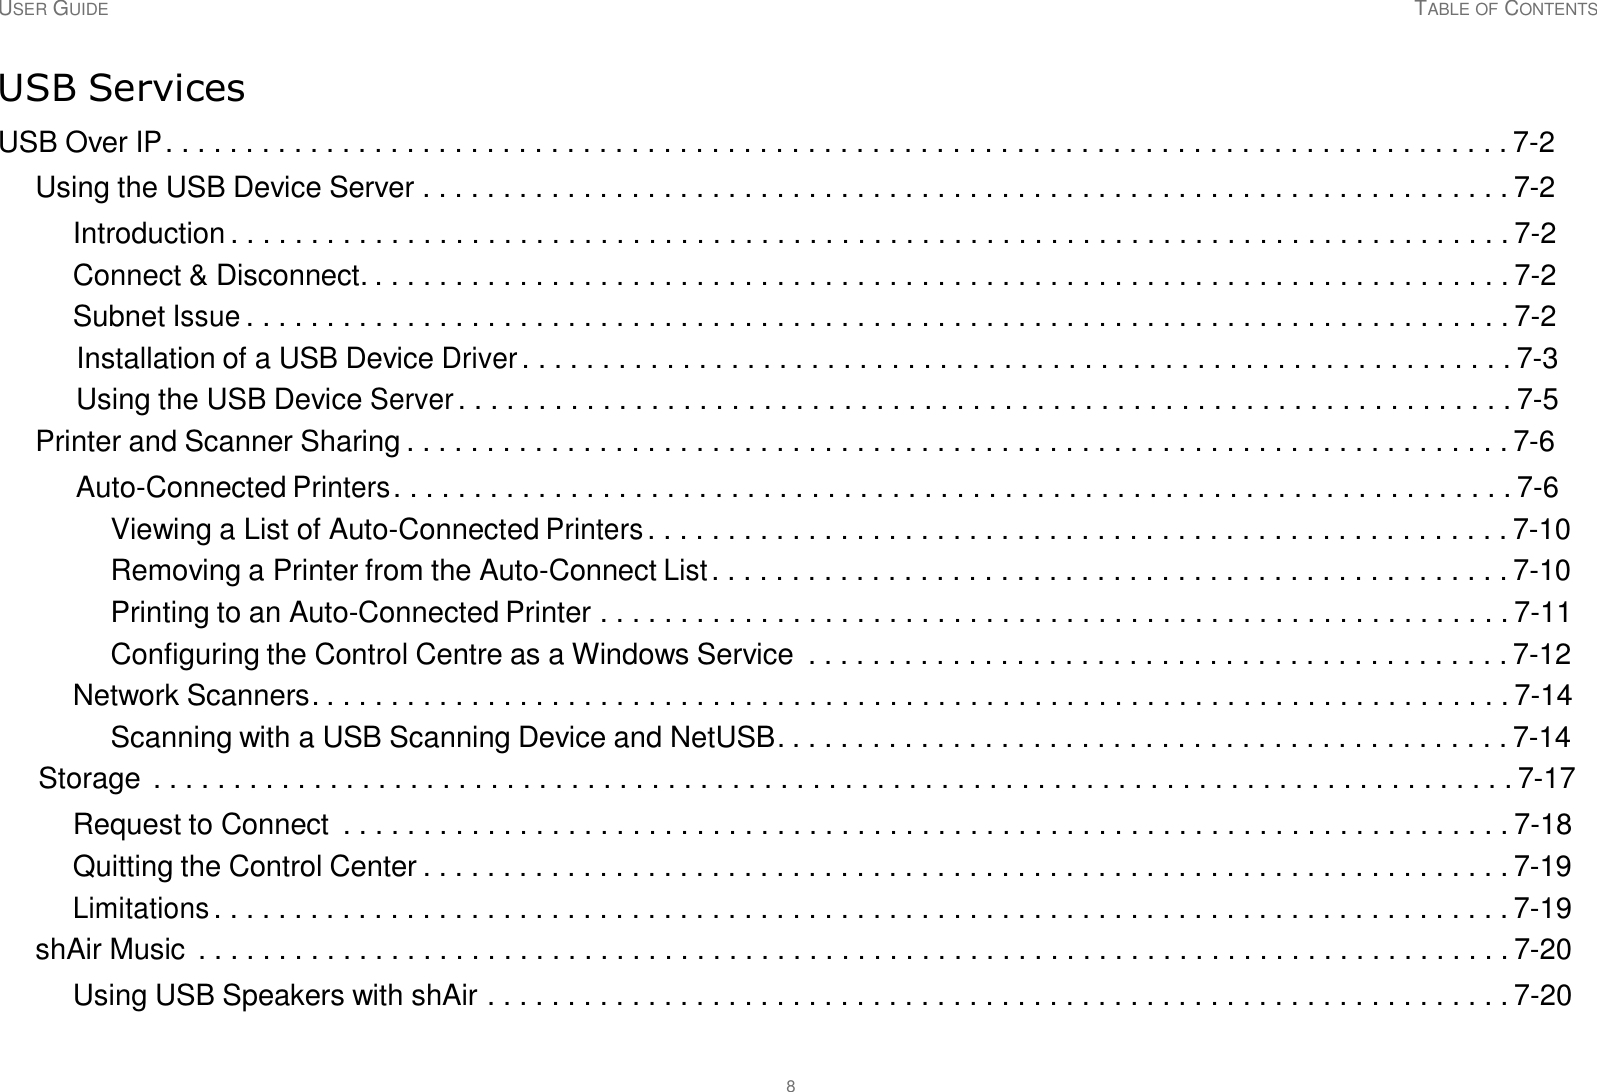 USER GUIDE TABLE OF CONTENTS 8     USB Services  USB Over IP . . . . . . . . . . . . . . . . . . . . . . . . . . . . . . . . . . . . . . . . . . . . . . . . . . . . . . . . . . . . . . . . . . . . . . . . . . . . . . . . . . . . 7-2  Using the USB Device Server . . . . . . . . . . . . . . . . . . . . . . . . . . . . . . . . . . . . . . . . . . . . . . . . . . . . . . . . . . . . . . . . . . . . 7-2  Introduction . . . . . . . . . . . . . . . . . . . . . . . . . . . . . . . . . . . . . . . . . . . . . . . . . . . . . . . . . . . . . . . . . . . . . . . . . . . . . . . . 7-2 Connect &amp; Disconnect. . . . . . . . . . . . . . . . . . . . . . . . . . . . . . . . . . . . . . . . . . . . . . . . . . . . . . . . . . . . . . . . . . . . . . . . 7-2 Subnet Issue . . . . . . . . . . . . . . . . . . . . . . . . . . . . . . . . . . . . . . . . . . . . . . . . . . . . . . . . . . . . . . . . . . . . . . . . . . . . . . . 7-2 Installation of a USB Device Driver . . . . . . . . . . . . . . . . . . . . . . . . . . . . . . . . . . . . . . . . . . . . . . . . . . . . . . . . . . . . . . 7-3 Using the USB Device Server . . . . . . . . . . . . . . . . . . . . . . . . . . . . . . . . . . . . . . . . . . . . . . . . . . . . . . . . . . . . . . . . . . 7-5 Printer and Scanner Sharing . . . . . . . . . . . . . . . . . . . . . . . . . . . . . . . . . . . . . . . . . . . . . . . . . . . . . . . . . . . . . . . . . . . . . 7-6  Auto-Connected Printers . . . . . . . . . . . . . . . . . . . . . . . . . . . . . . . . . . . . . . . . . . . . . . . . . . . . . . . . . . . . . . . . . . . . . . 7-6 Viewing a List of Auto-Connected Printers . . . . . . . . . . . . . . . . . . . . . . . . . . . . . . . . . . . . . . . . . . . . . . . . . . . . . . 7-10 Removing a Printer from the Auto-Connect List . . . . . . . . . . . . . . . . . . . . . . . . . . . . . . . . . . . . . . . . . . . . . . . . . . 7-10 Printing to an Auto-Connected Printer . . . . . . . . . . . . . . . . . . . . . . . . . . . . . . . . . . . . . . . . . . . . . . . . . . . . . . . . . 7-11 Configuring the Control Centre as a Windows Service  . . . . . . . . . . . . . . . . . . . . . . . . . . . . . . . . . . . . . . . . . . . . 7-12 Network Scanners. . . . . . . . . . . . . . . . . . . . . . . . . . . . . . . . . . . . . . . . . . . . . . . . . . . . . . . . . . . . . . . . . . . . . . . . . . . 7-14 Scanning with a USB Scanning Device and NetUSB. . . . . . . . . . . . . . . . . . . . . . . . . . . . . . . . . . . . . . . . . . . . . . 7-14 Storage . . . . . . . . . . . . . . . . . . . . . . . . . . . . . . . . . . . . . . . . . . . . . . . . . . . . . . . . . . . . . . . . . . . . . . . . . . . . . . . . . . . . . 7-17  Request to Connect  . . . . . . . . . . . . . . . . . . . . . . . . . . . . . . . . . . . . . . . . . . . . . . . . . . . . . . . . . . . . . . . . . . . . . . . . . 7-18 Quitting the Control Center . . . . . . . . . . . . . . . . . . . . . . . . . . . . . . . . . . . . . . . . . . . . . . . . . . . . . . . . . . . . . . . . . . . . 7-19 Limitations . . . . . . . . . . . . . . . . . . . . . . . . . . . . . . . . . . . . . . . . . . . . . . . . . . . . . . . . . . . . . . . . . . . . . . . . . . . . . . . . . 7-19 shAir Music  . . . . . . . . . . . . . . . . . . . . . . . . . . . . . . . . . . . . . . . . . . . . . . . . . . . . . . . . . . . . . . . . . . . . . . . . . . . . . . . . . . 7-20 Using USB Speakers with shAir . . . . . . . . . . . . . . . . . . . . . . . . . . . . . . . . . . . . . . . . . . . . . . . . . . . . . . . . . . . . . . . . 7-20 